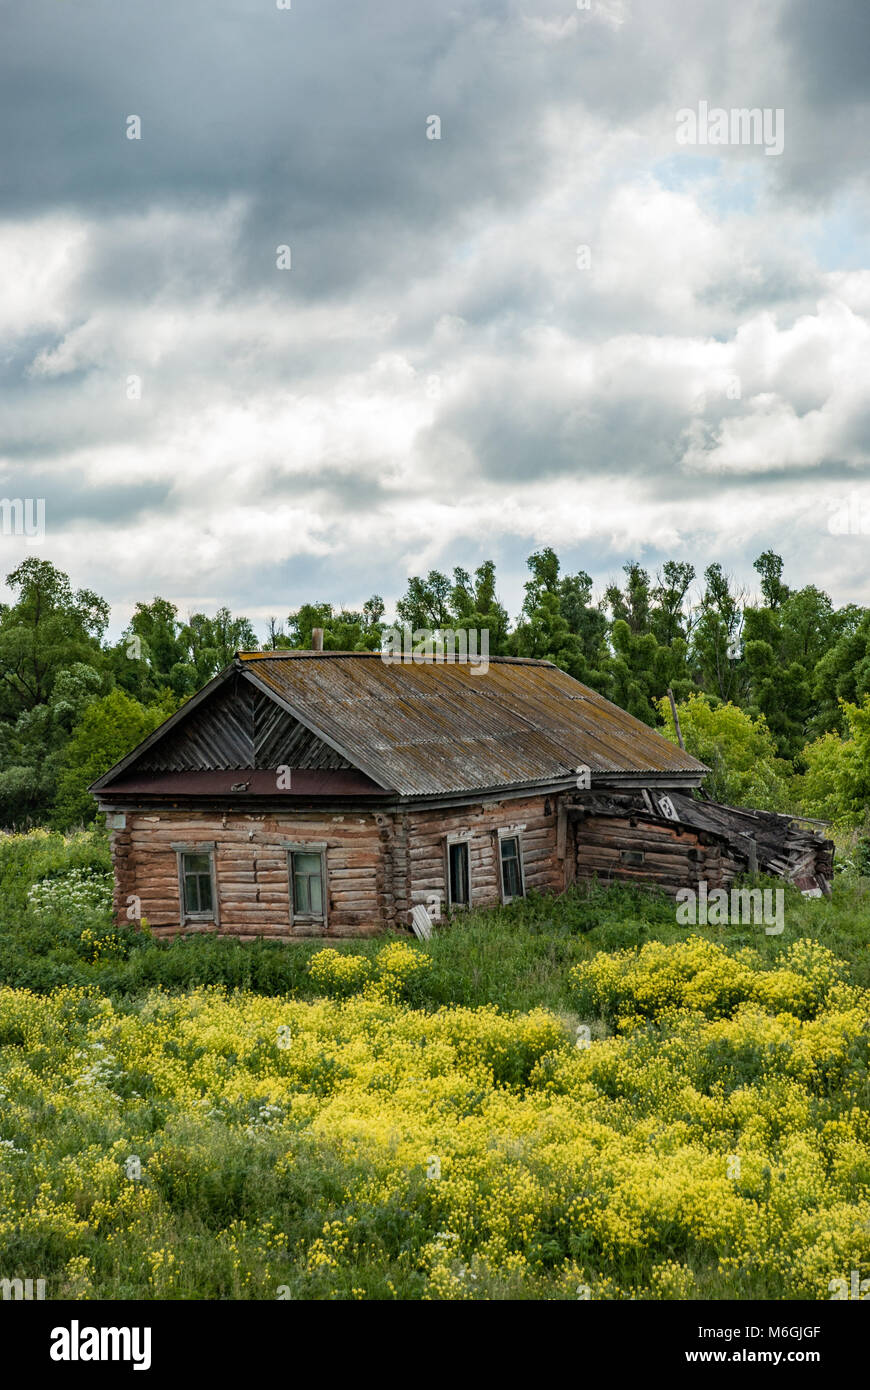 Old shack and blooming grass in countryside. Yellow flowers and green grass growing near aged wooden hut against cloudy sky. Abandoned old log house Stock Photo